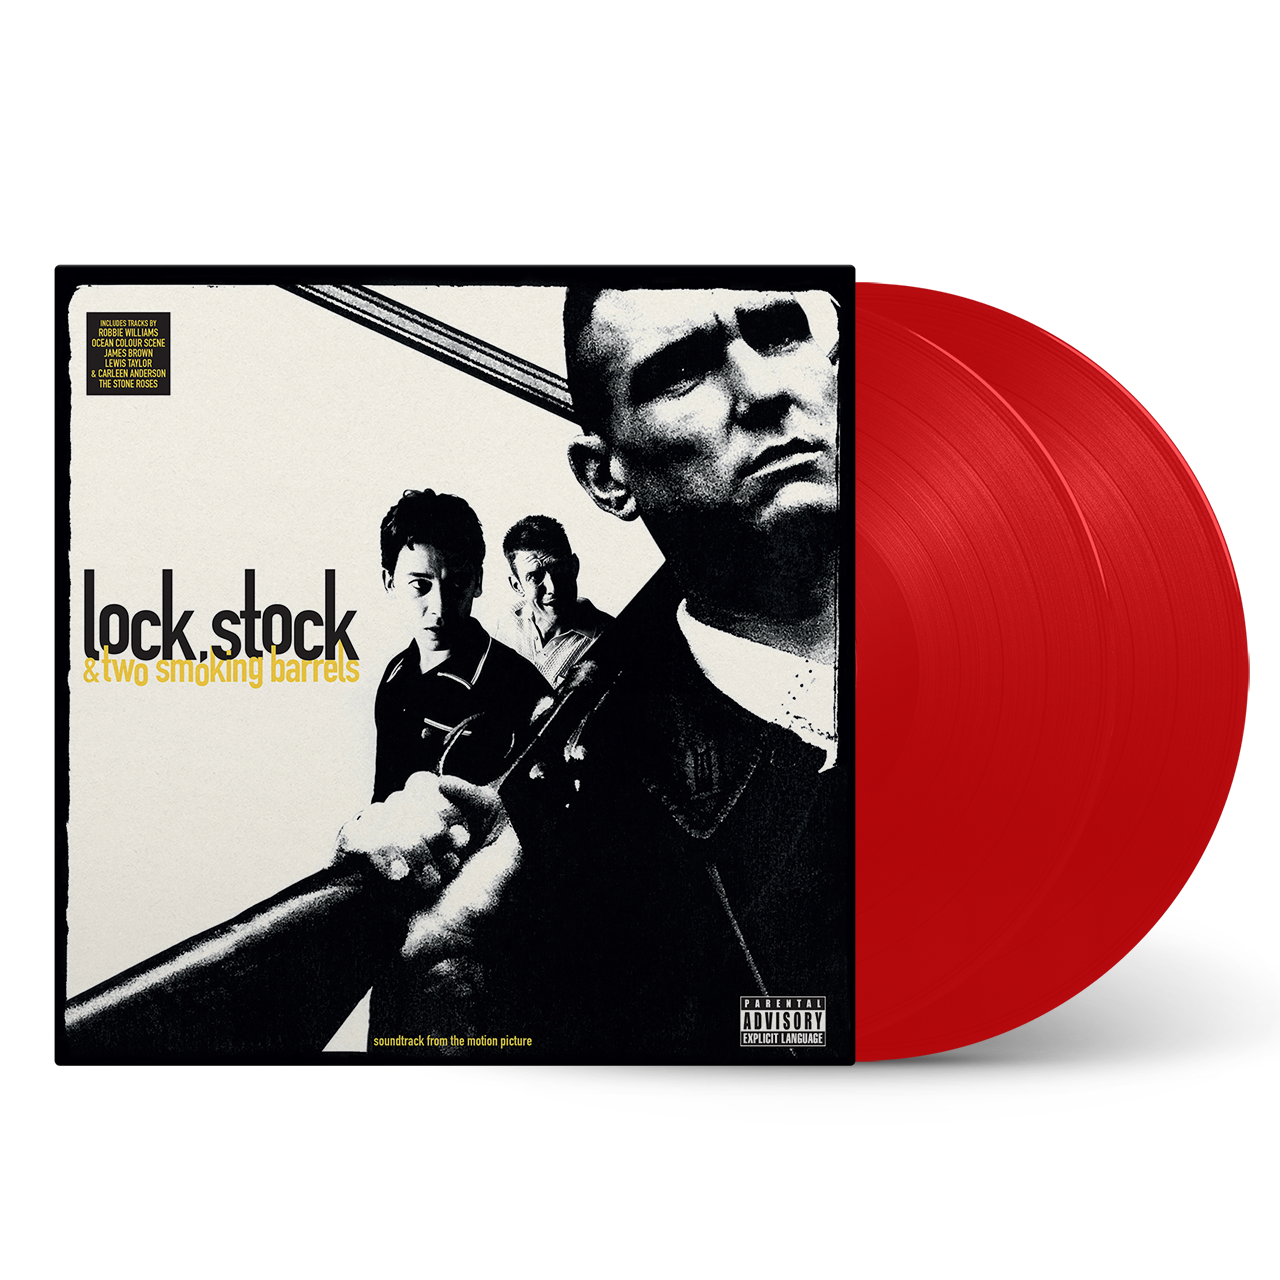 Original Soundtrack - Lock, Stock And Two Smoking Barrels (25th Anniversary): Limited Red Vinyl 2LP